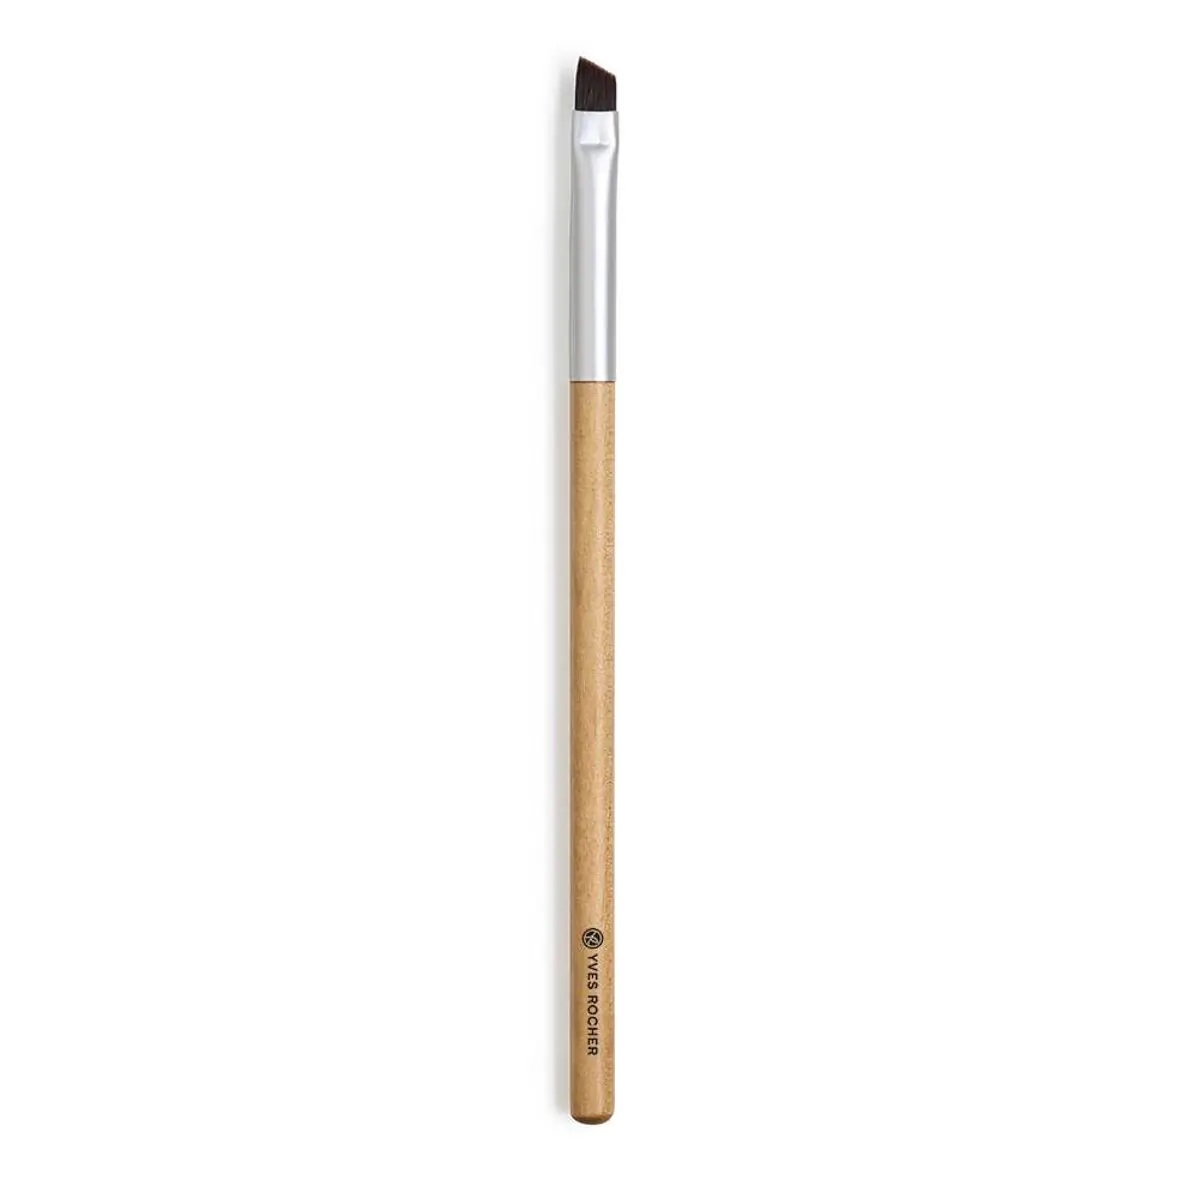 Yves Rocher Makeup Brushes: Why?